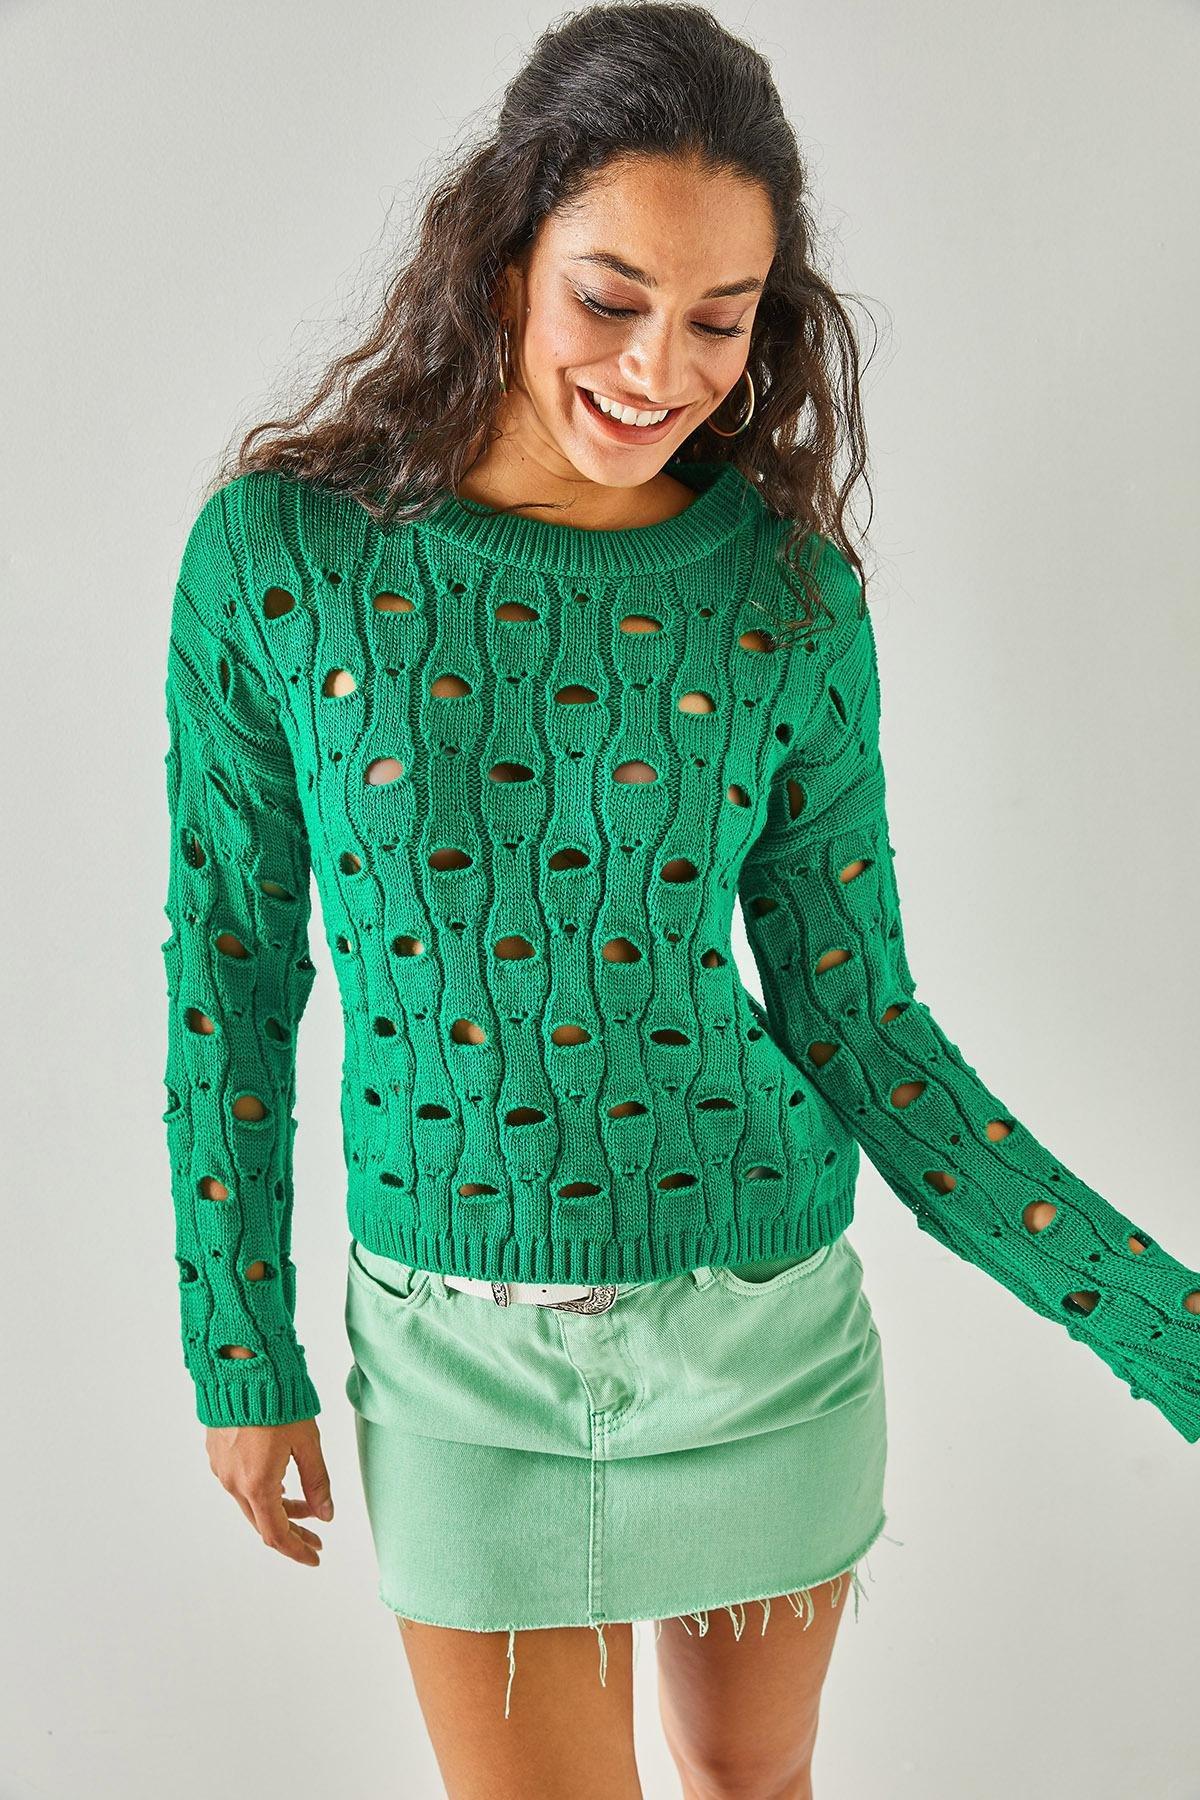 Olalook - Green Large Hole Knitted Sweater